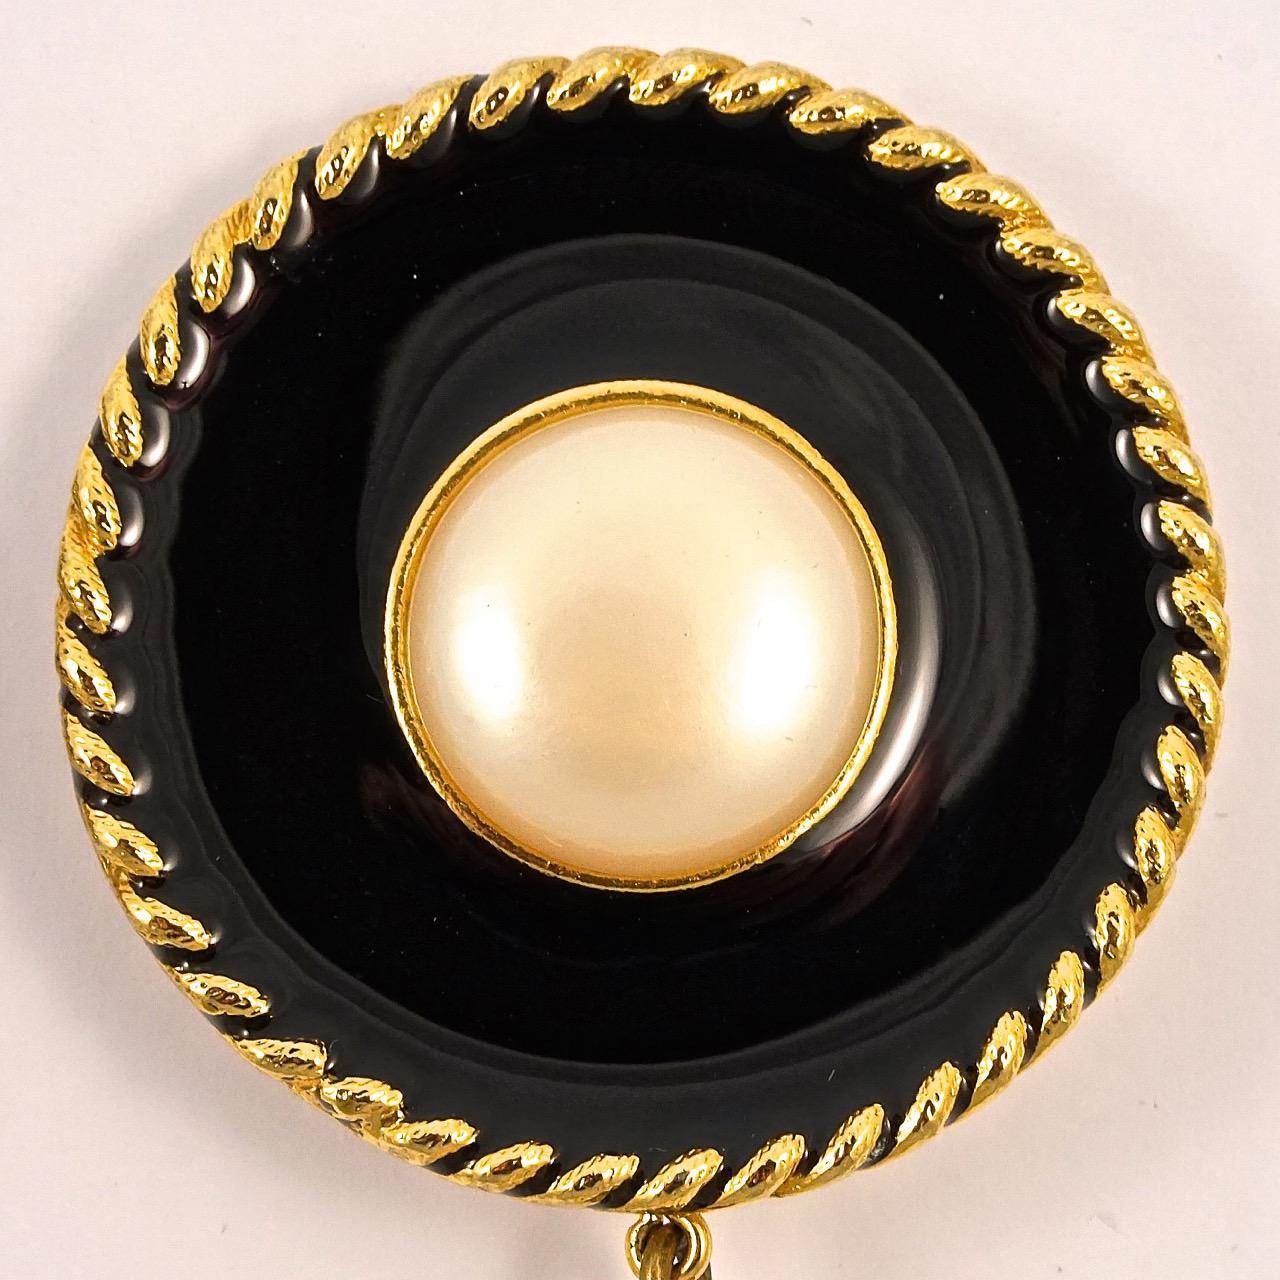 Fabulous gold plated clip on earrings featuring cream faux pearls and black enamel with a rope twist edging. The pearl drops are accentuated with a small circle of channel set rhinestones. Measuring length 8cm / 3.1 inches, and the black enamel